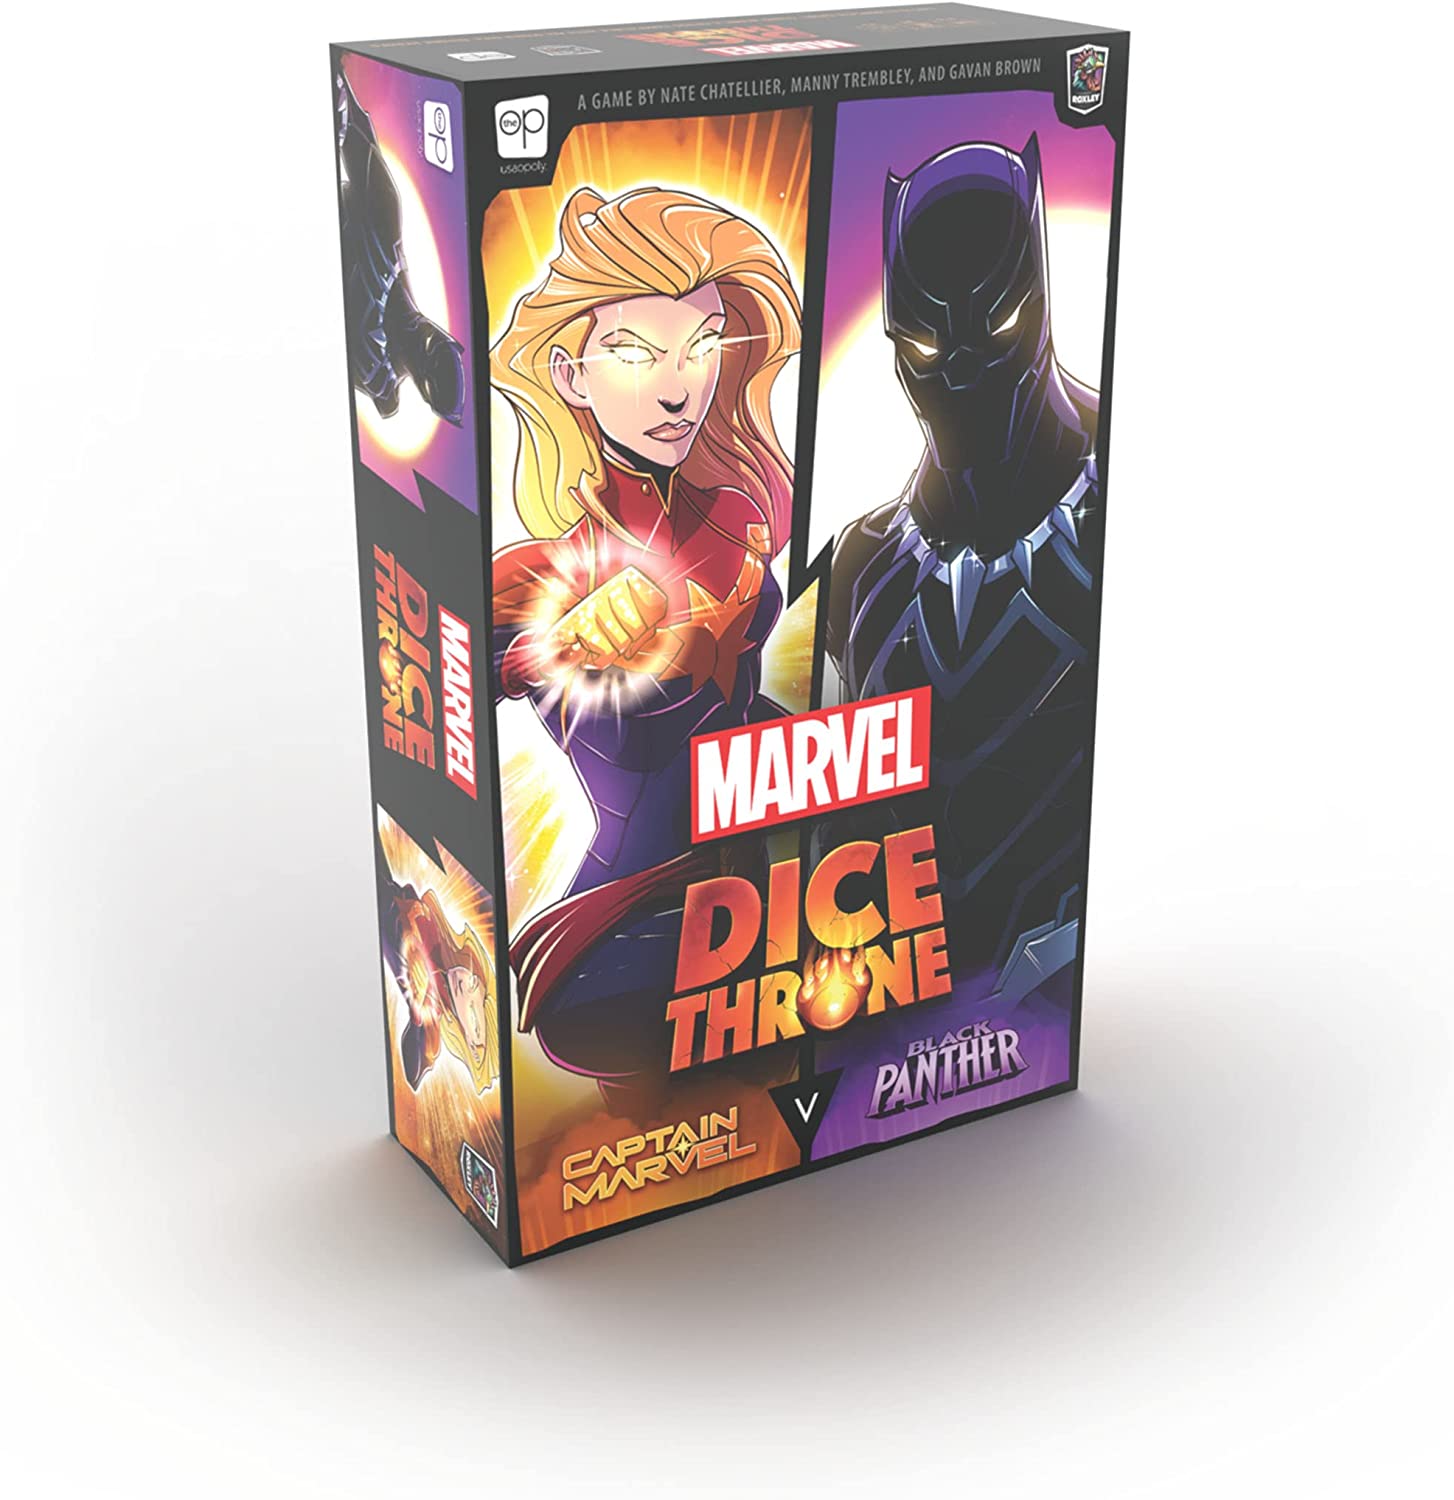 Marvel Dice Throne: 2-Hero Box 1 (Captain Marvel, Black Panther) - Bards & Cards